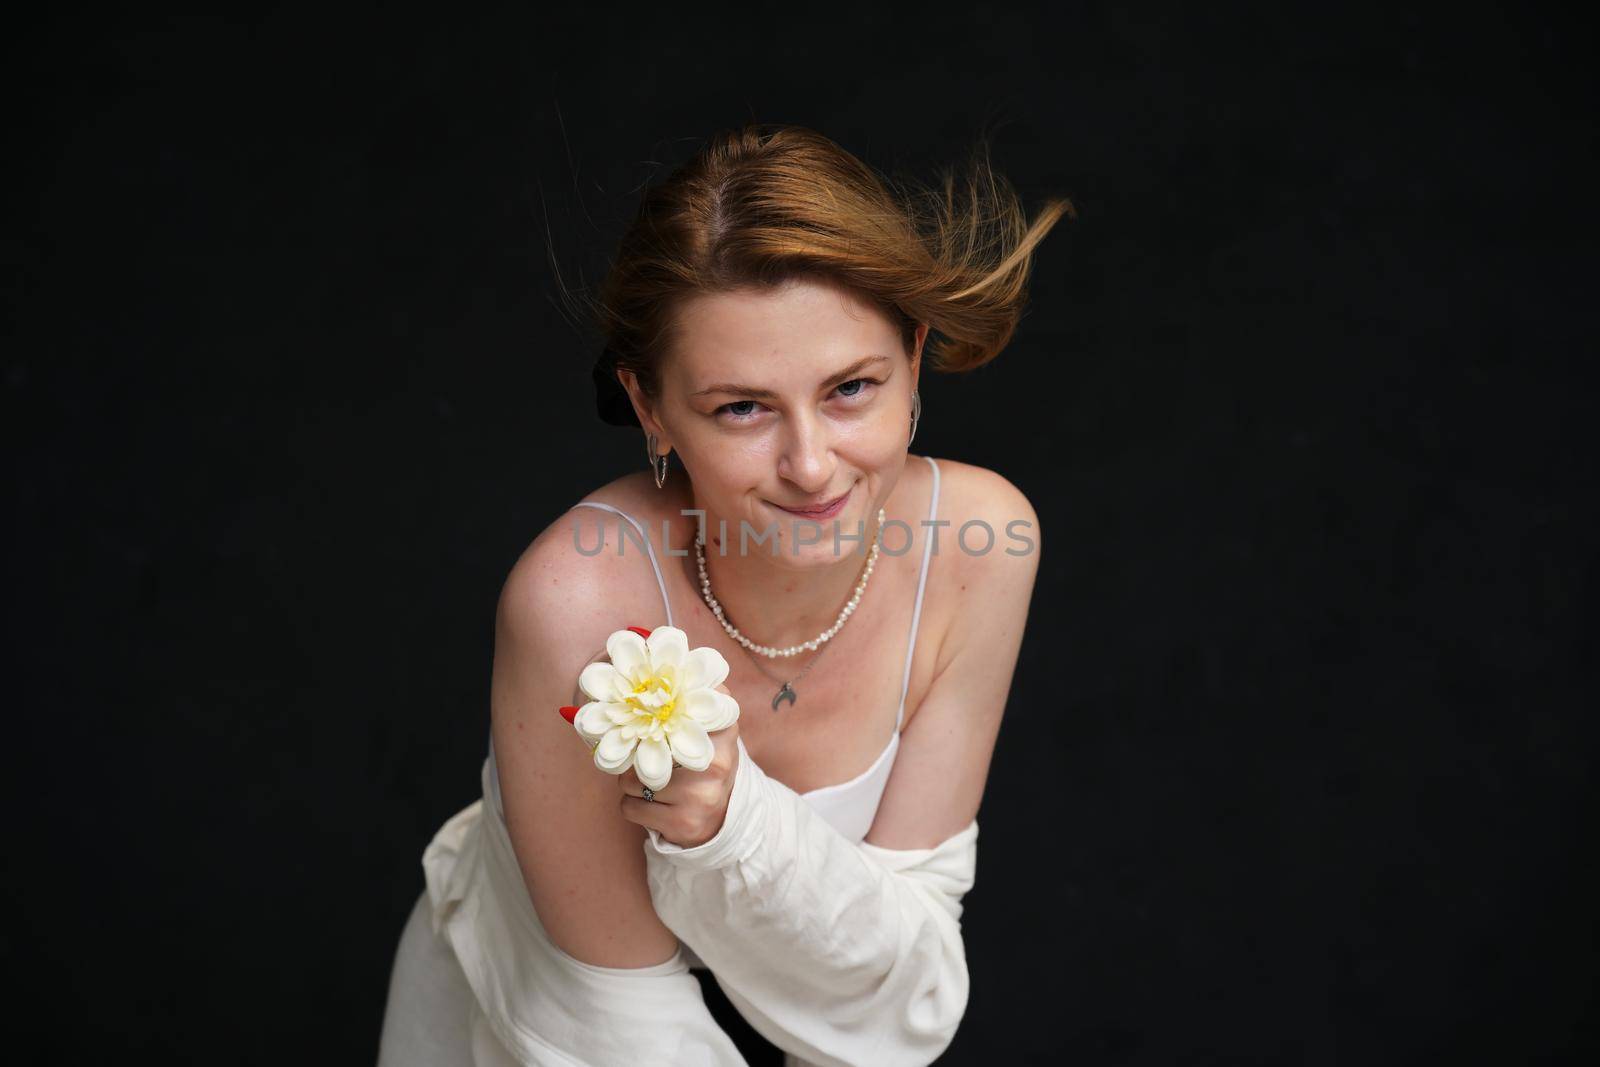 happy model in white shirt posing with flower with smile on black background by chichaevstudio